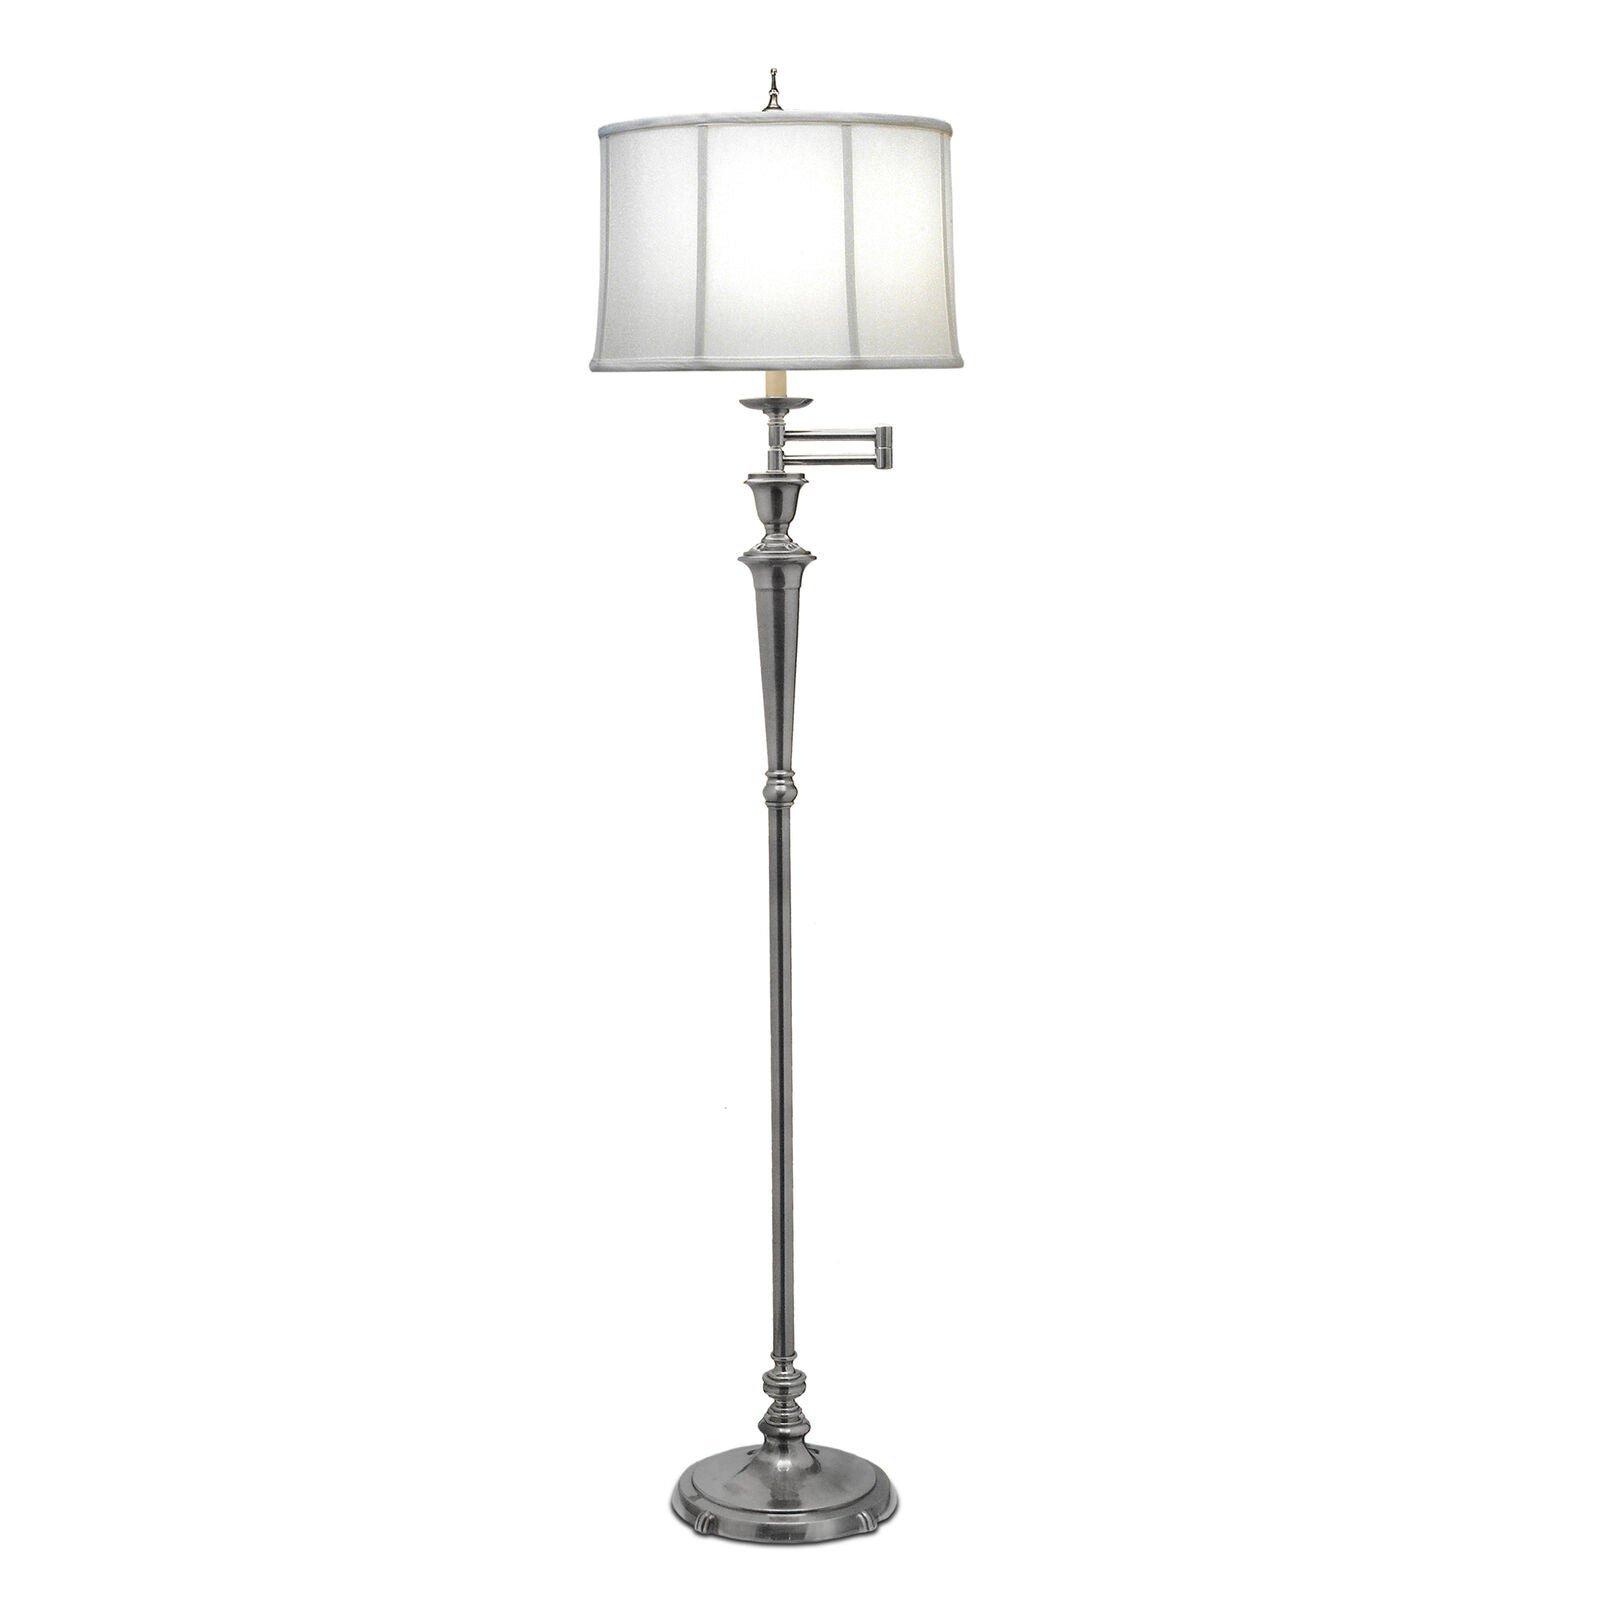 Floor Lamp Swing Arm Multi Direction Off White Shade Antique Nickel LED E27 60W